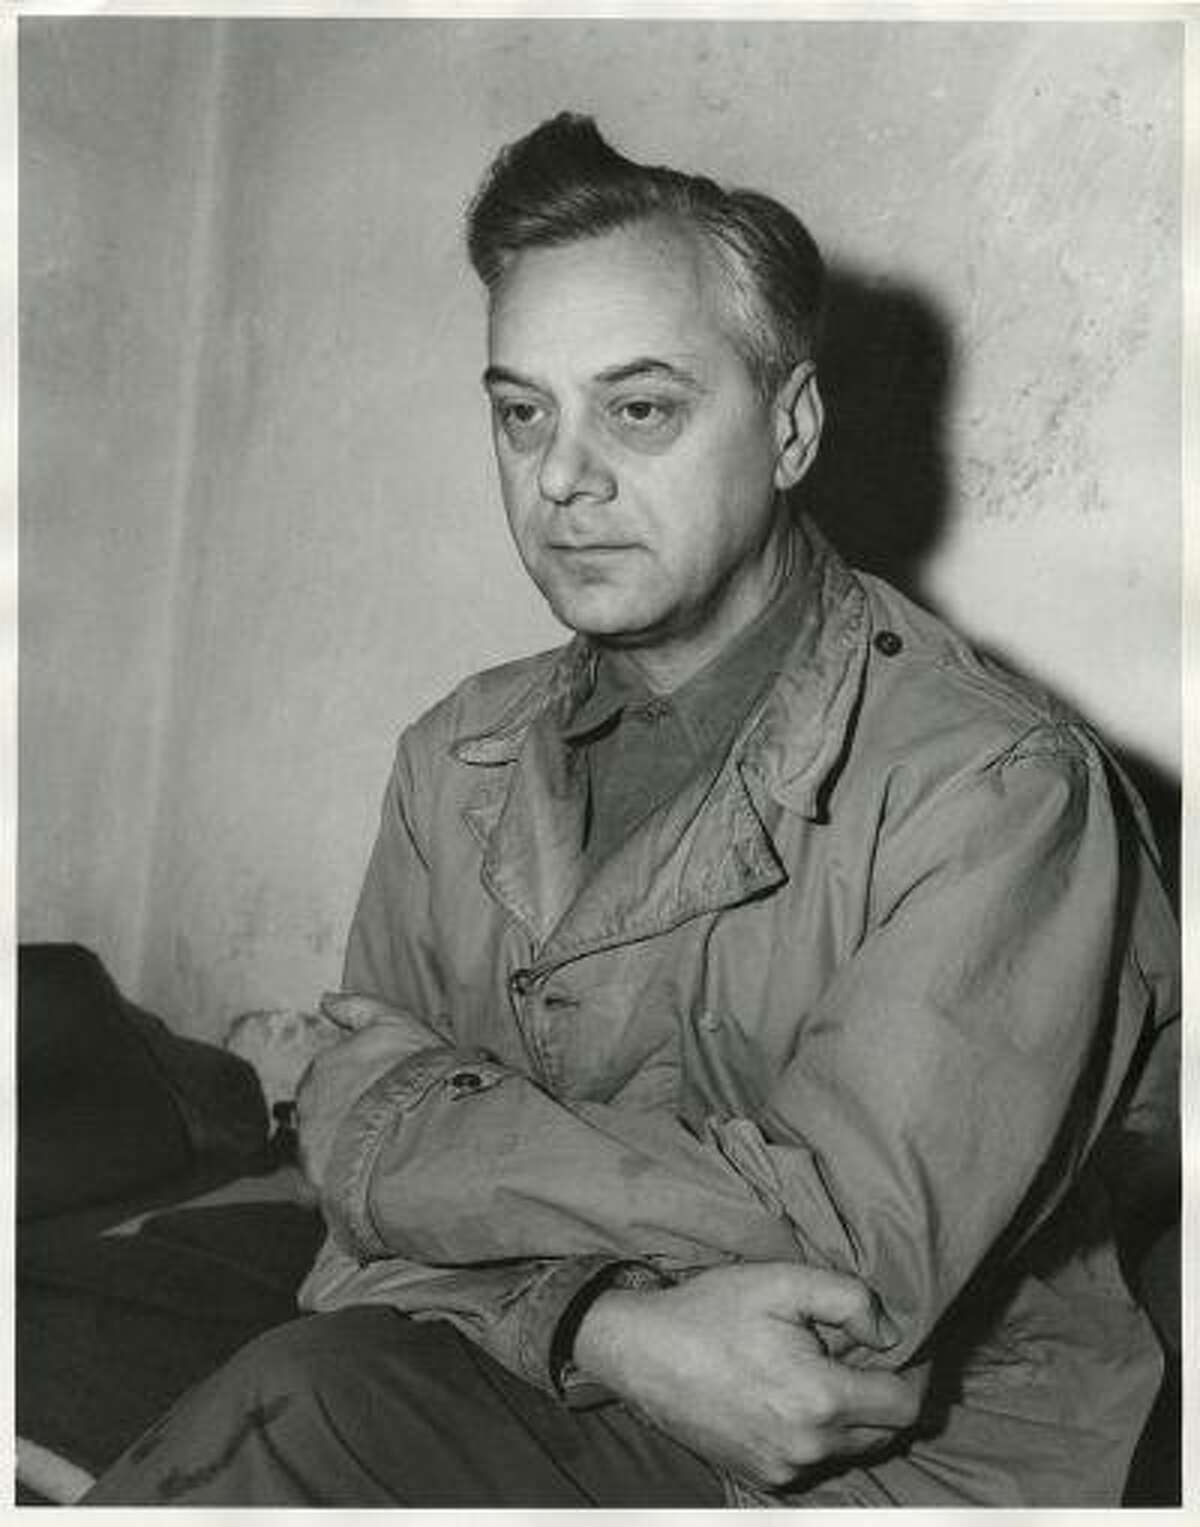 Defendant Alfred Rosenberg, the former Chief Nazi Party Ideologist, sits in his jail cell during the International Military Tribunal trial of war criminals at Nuremberg in this photograph taken by a United States Army Signal Corps photographer in Nuremberg on November 24, 1945. Rosenberg was hanged at Nuremberg after his conviction.